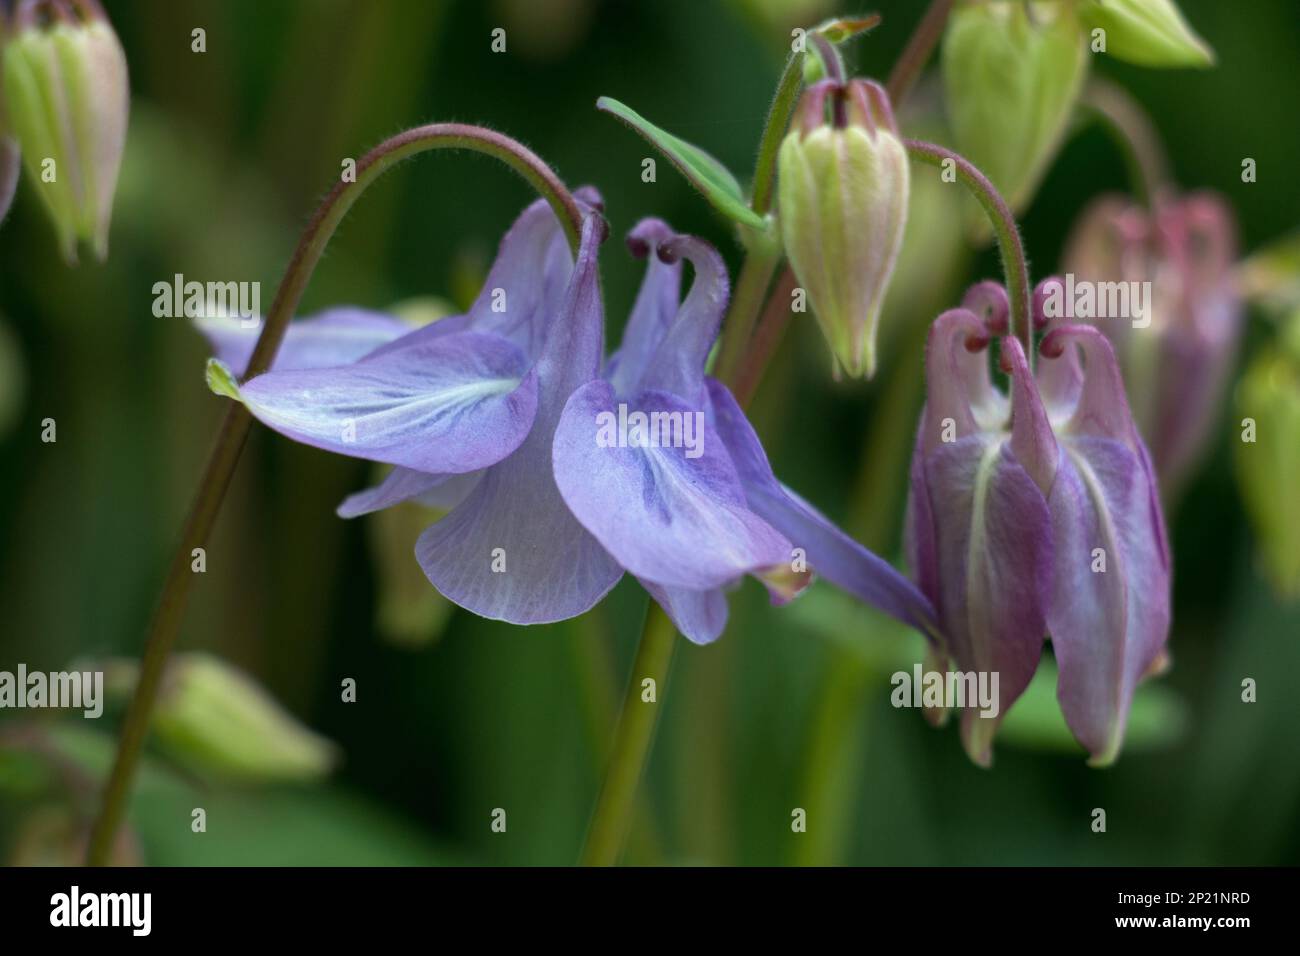 Purple lilac Columbine flower and buds, Aquilegia vulgaris, Granny’s Bonnets with spurred petals, blooming in summer, natural green background blur Stock Photo